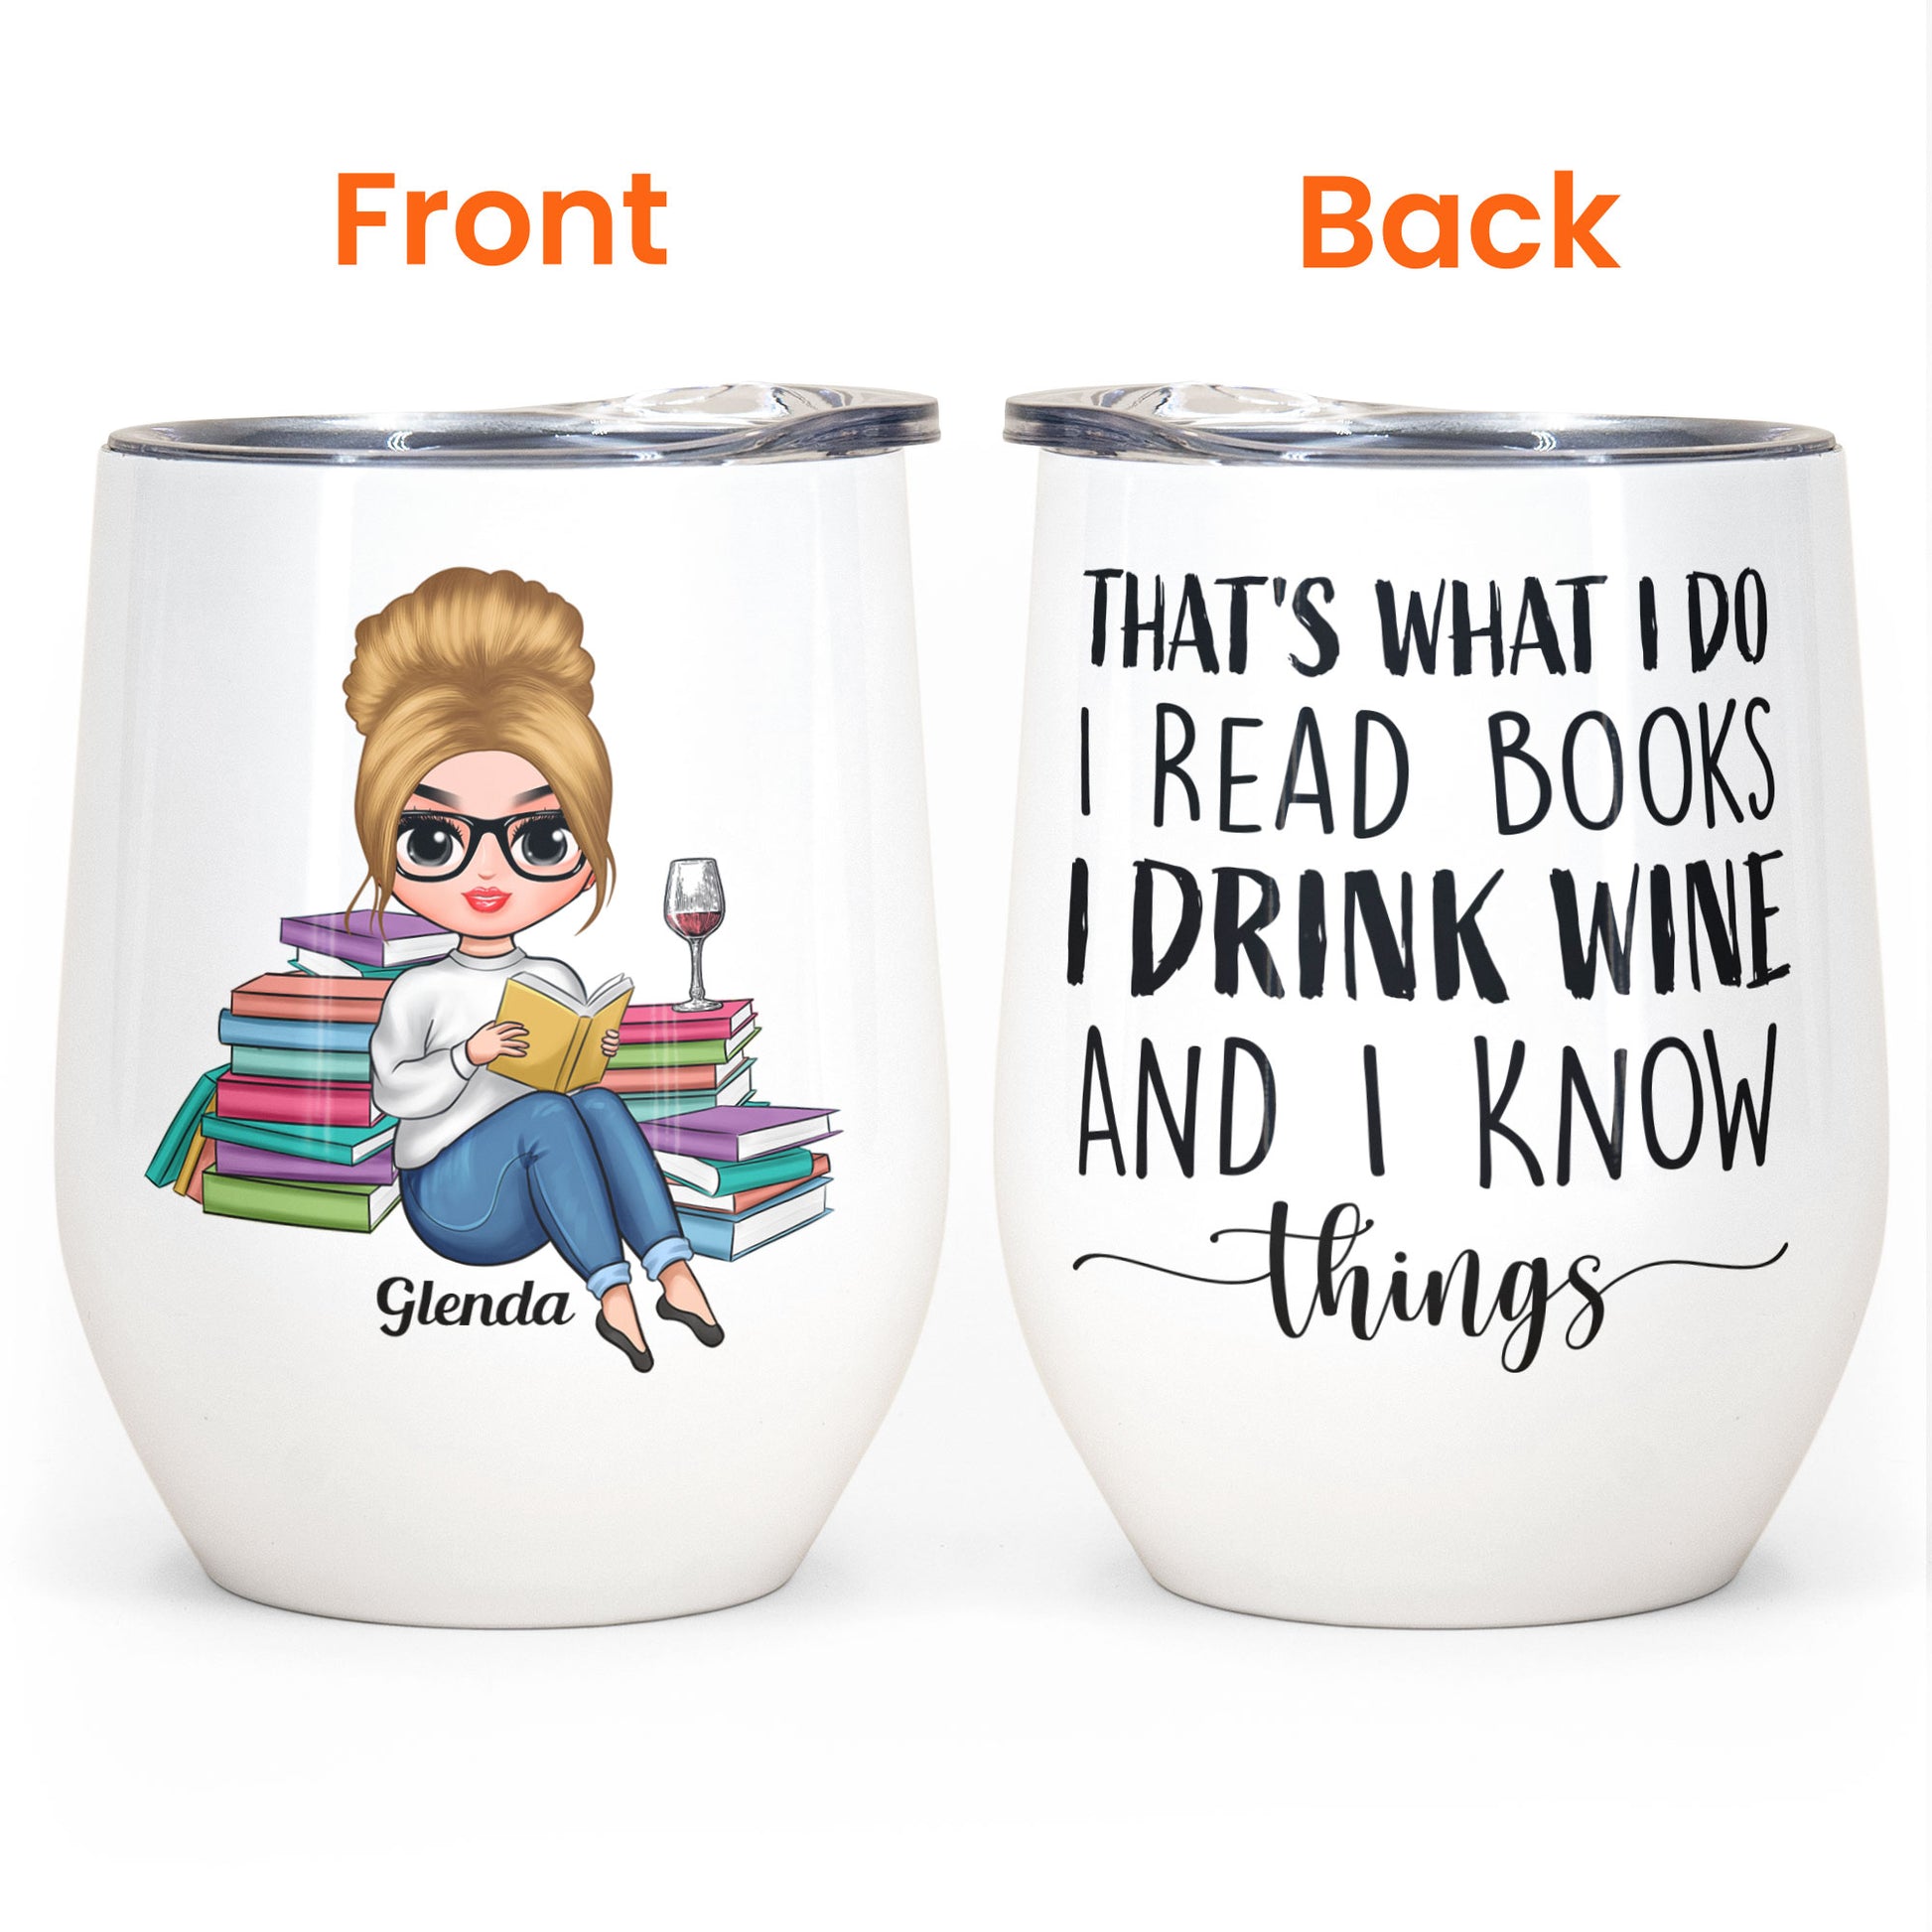 That's What I Do I Read Books I Drink Wine I Know Things - Personalized Wine Tumbler - Birthday Gift For Wine Loving Reader, Wine And Book Lover